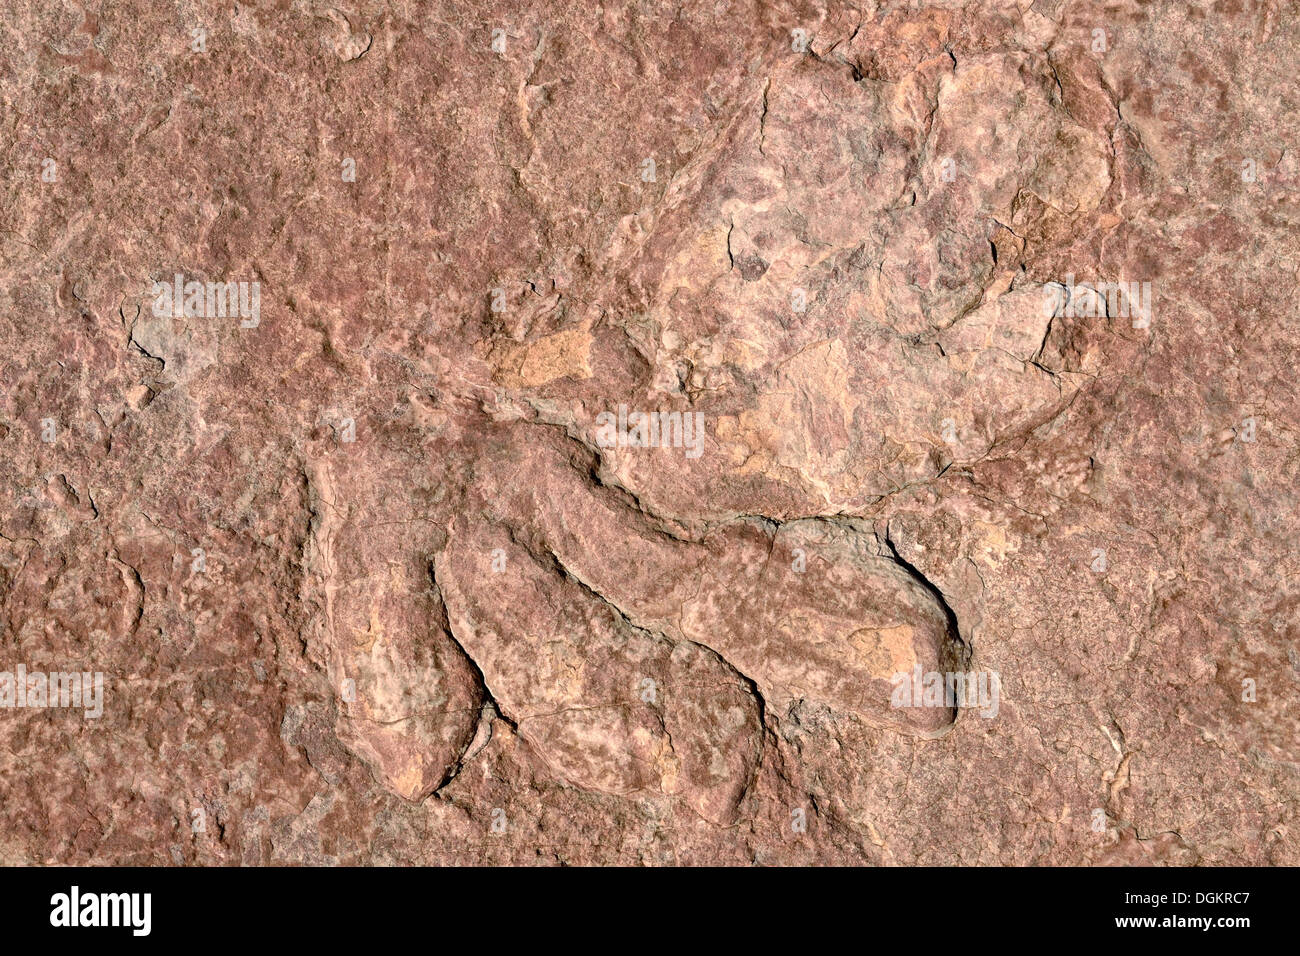 Fossilized footprints of a dinosaur, Dilophosaurus, partially preserved, about 170 million years, Jurassic Age Navajo Sandstone Stock Photo